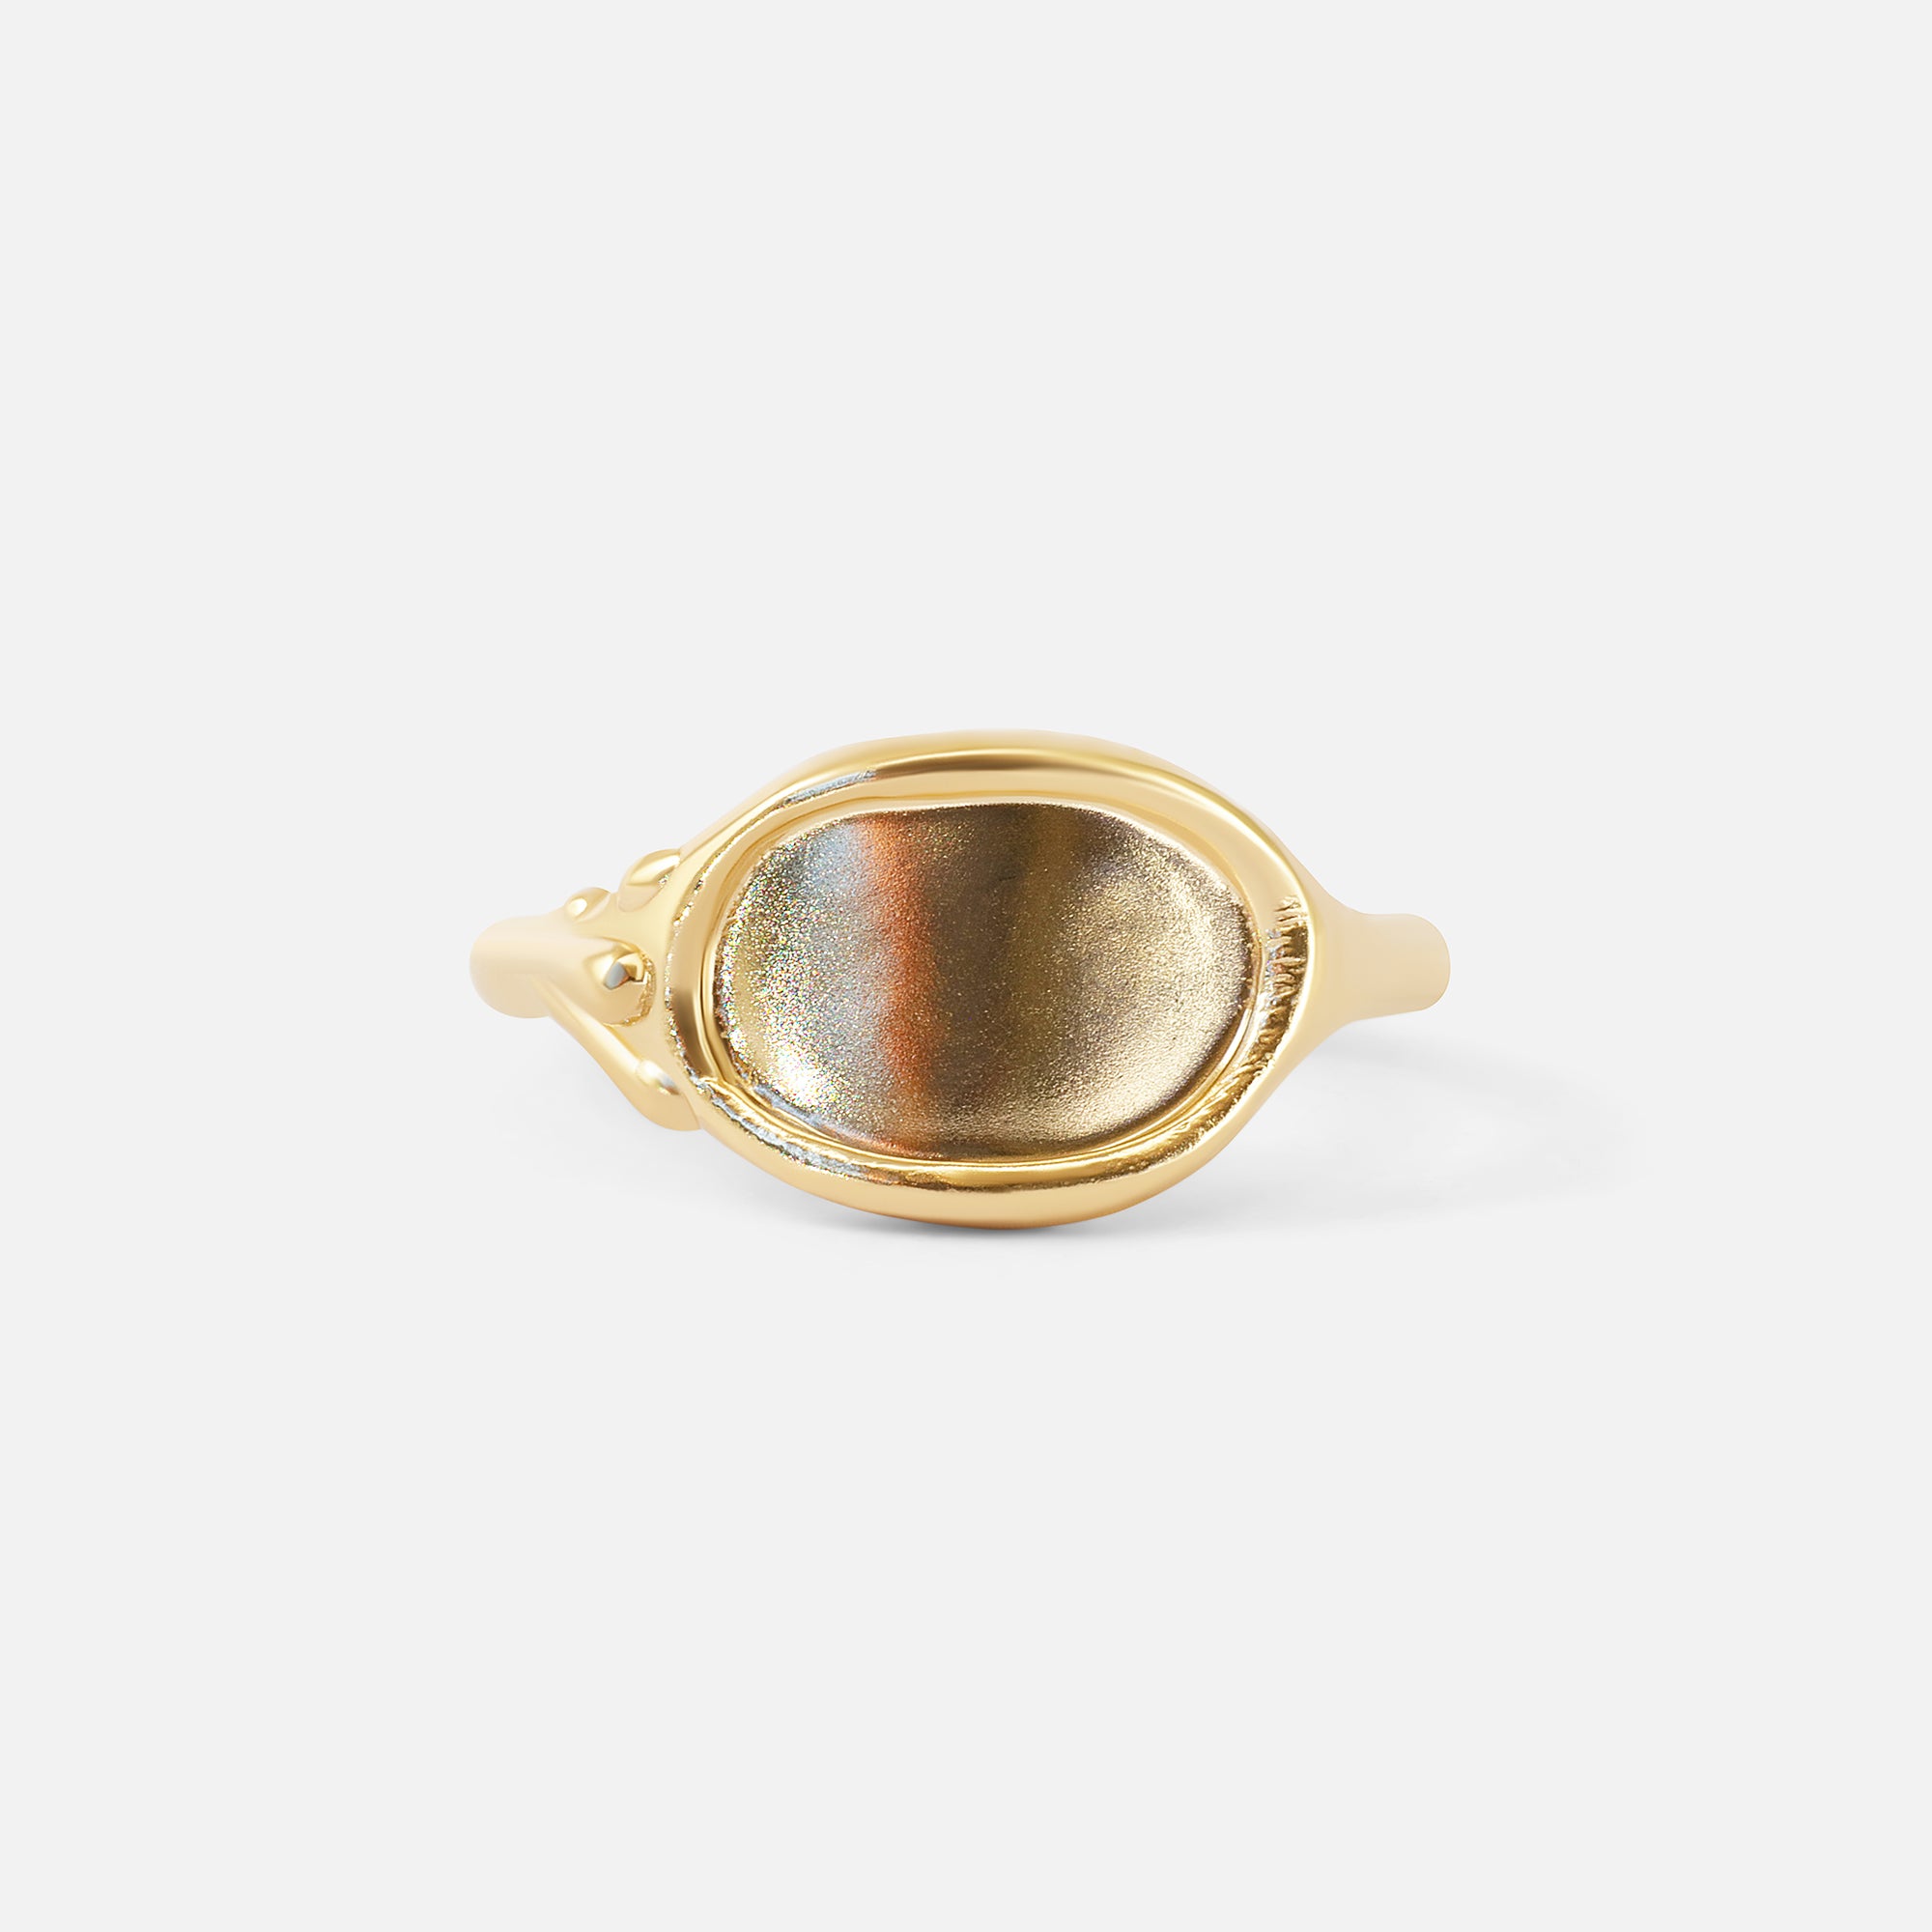 Reflection / II Ring By Alfonzo in rings Category